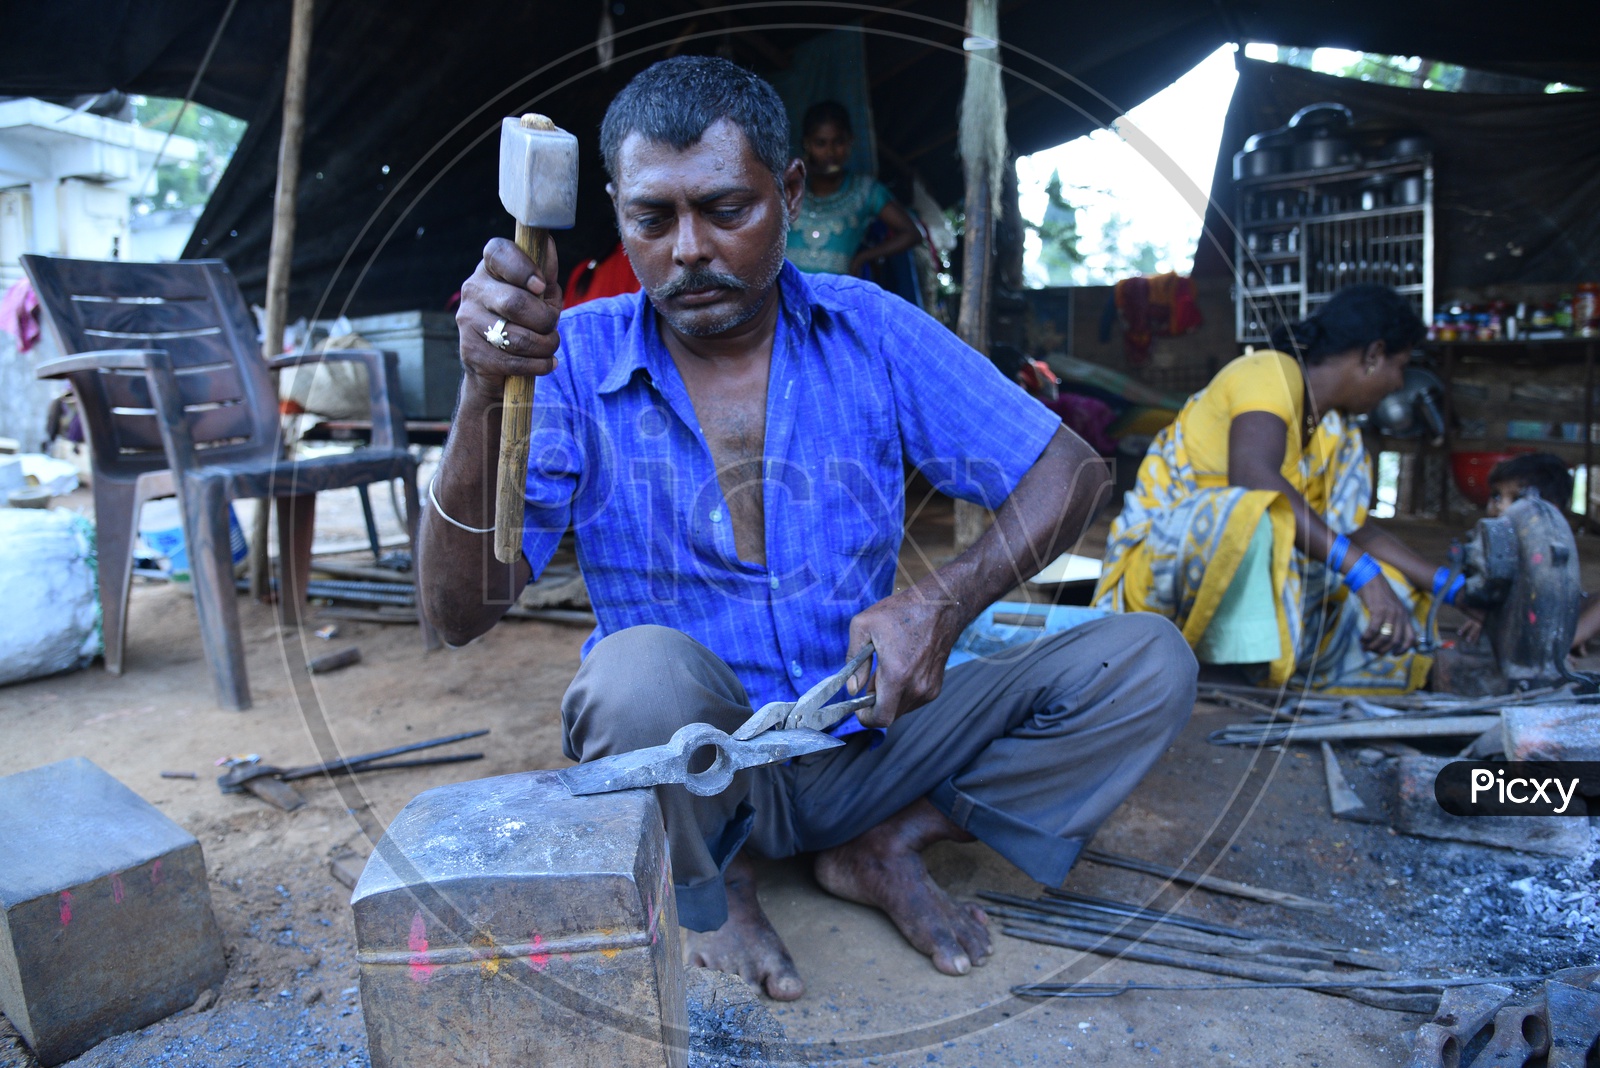 A Blacksmith Shaping the Iron Piece using Hammer